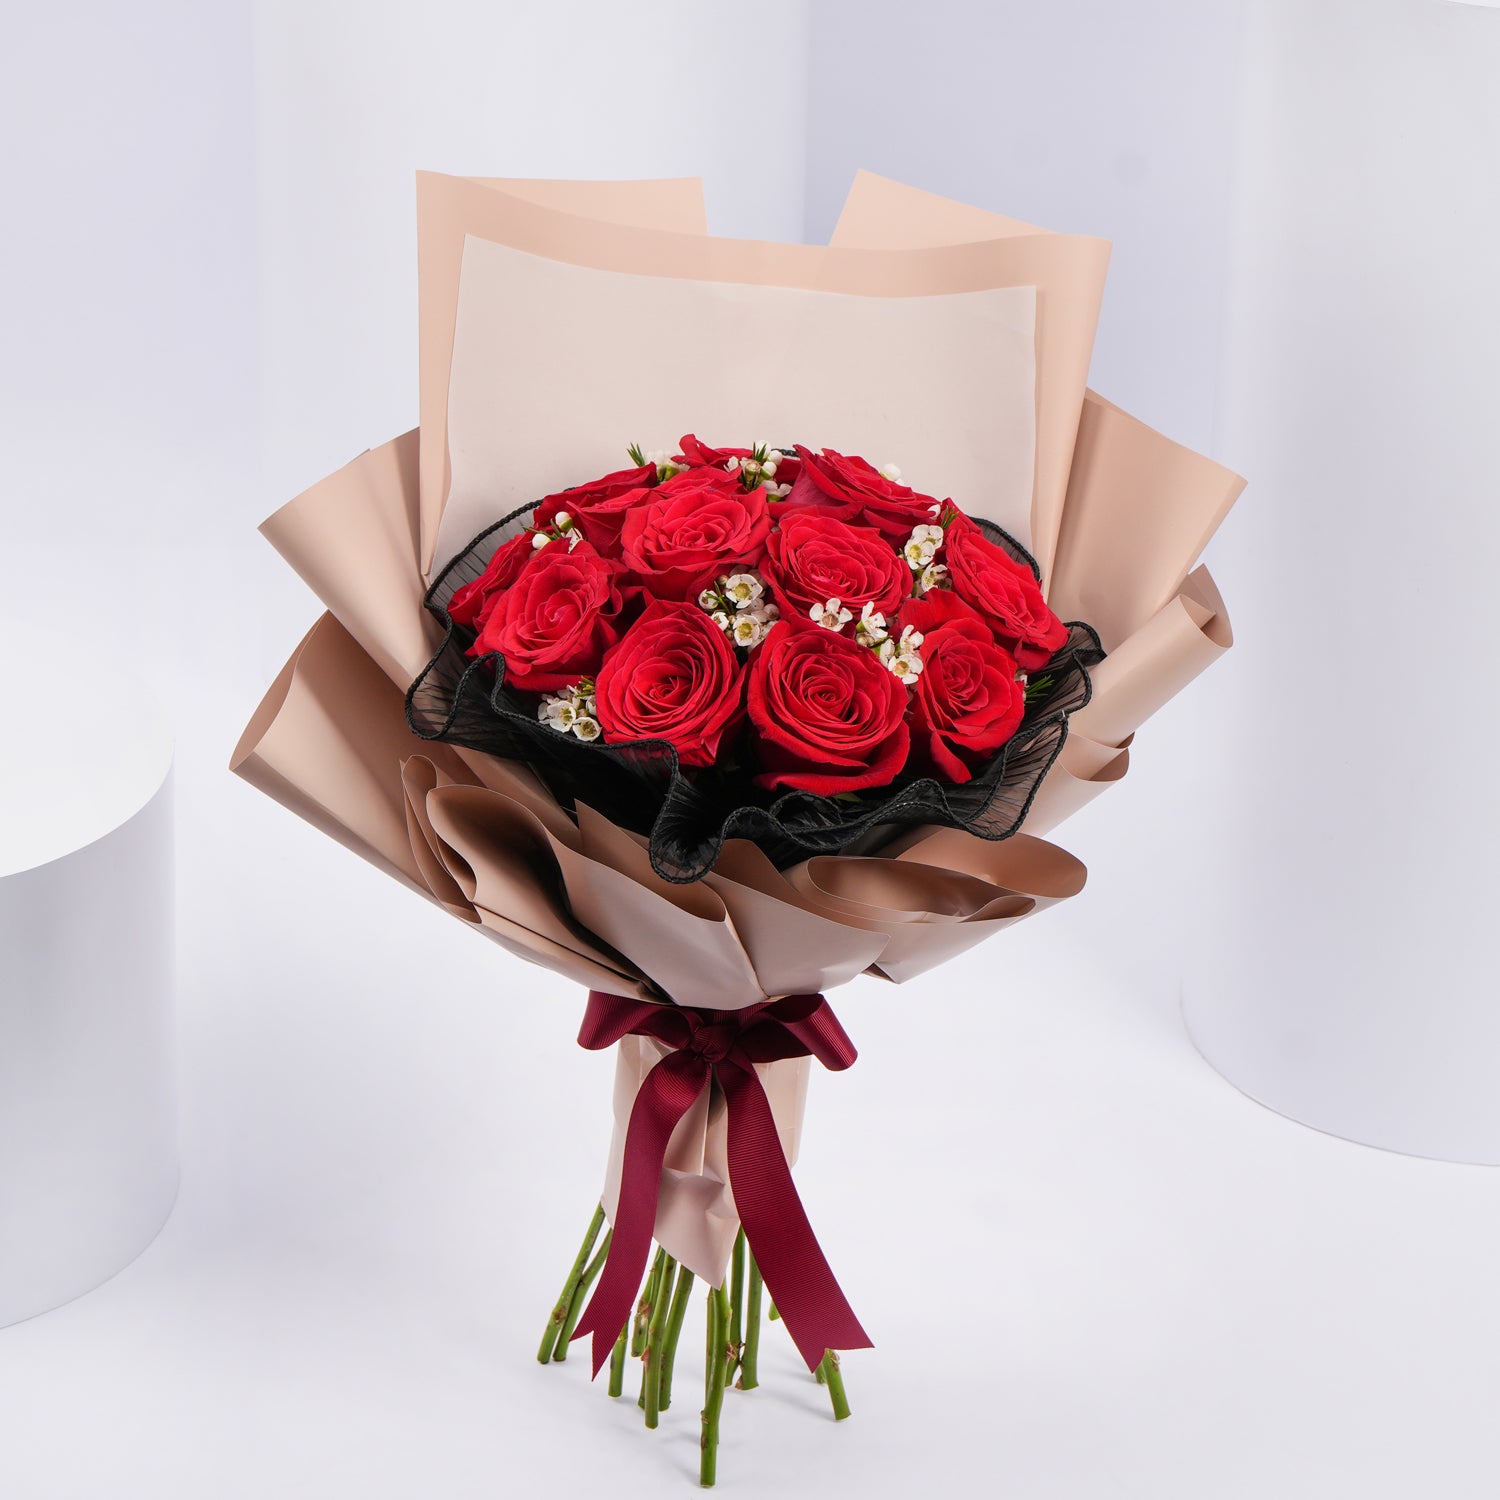 15 Red Roses Bouquet for Graduation Day